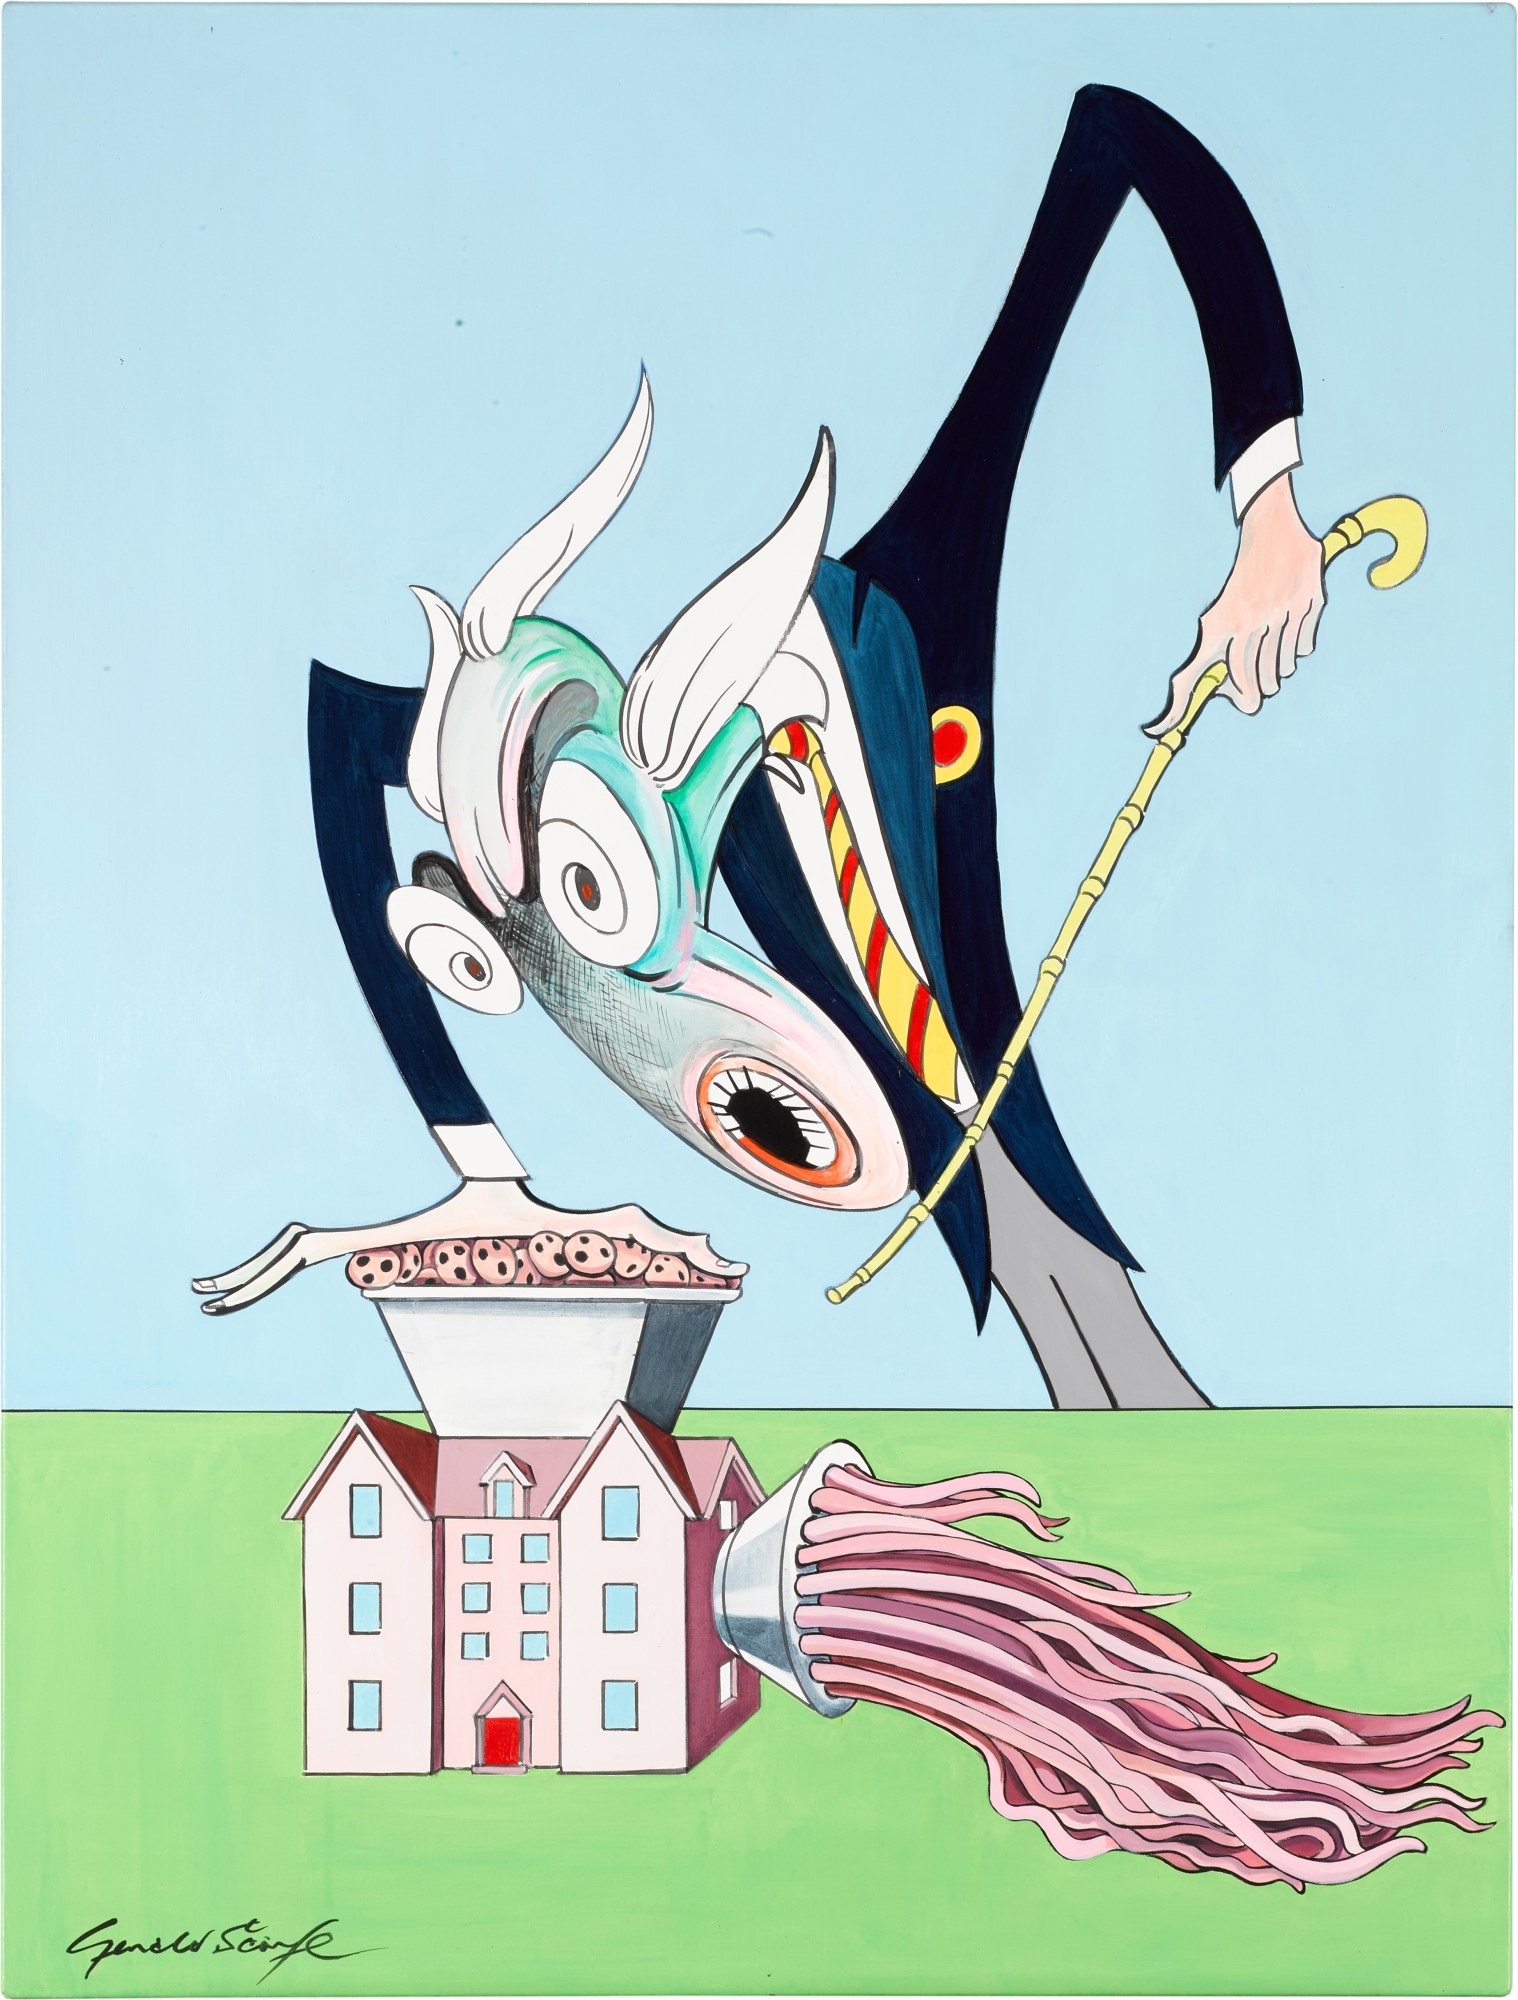 The Teacher and the Mincing Machine, by Gerald Scarfe, Executed in 2021